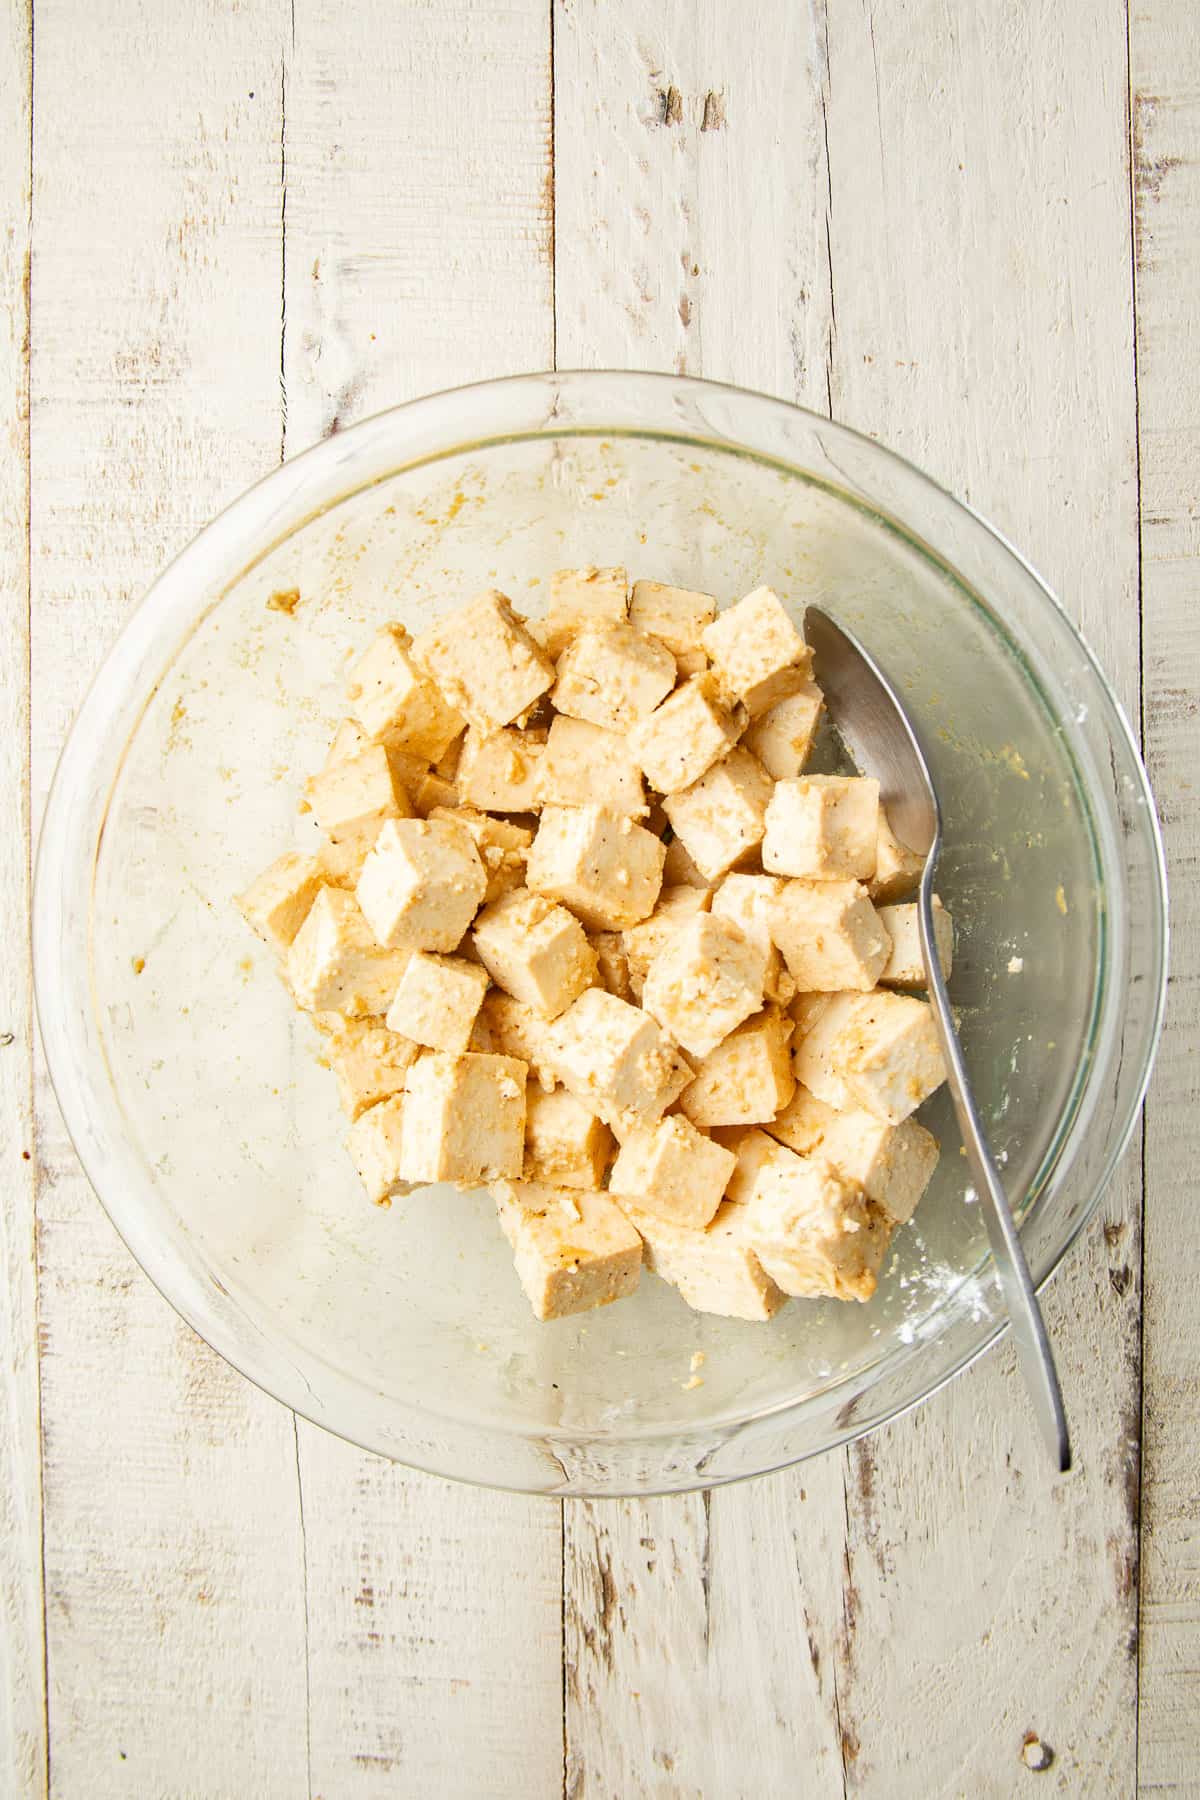 Tofu cubes coated in seasonings, oil and cornstarch, in a glass bowl with spoon.